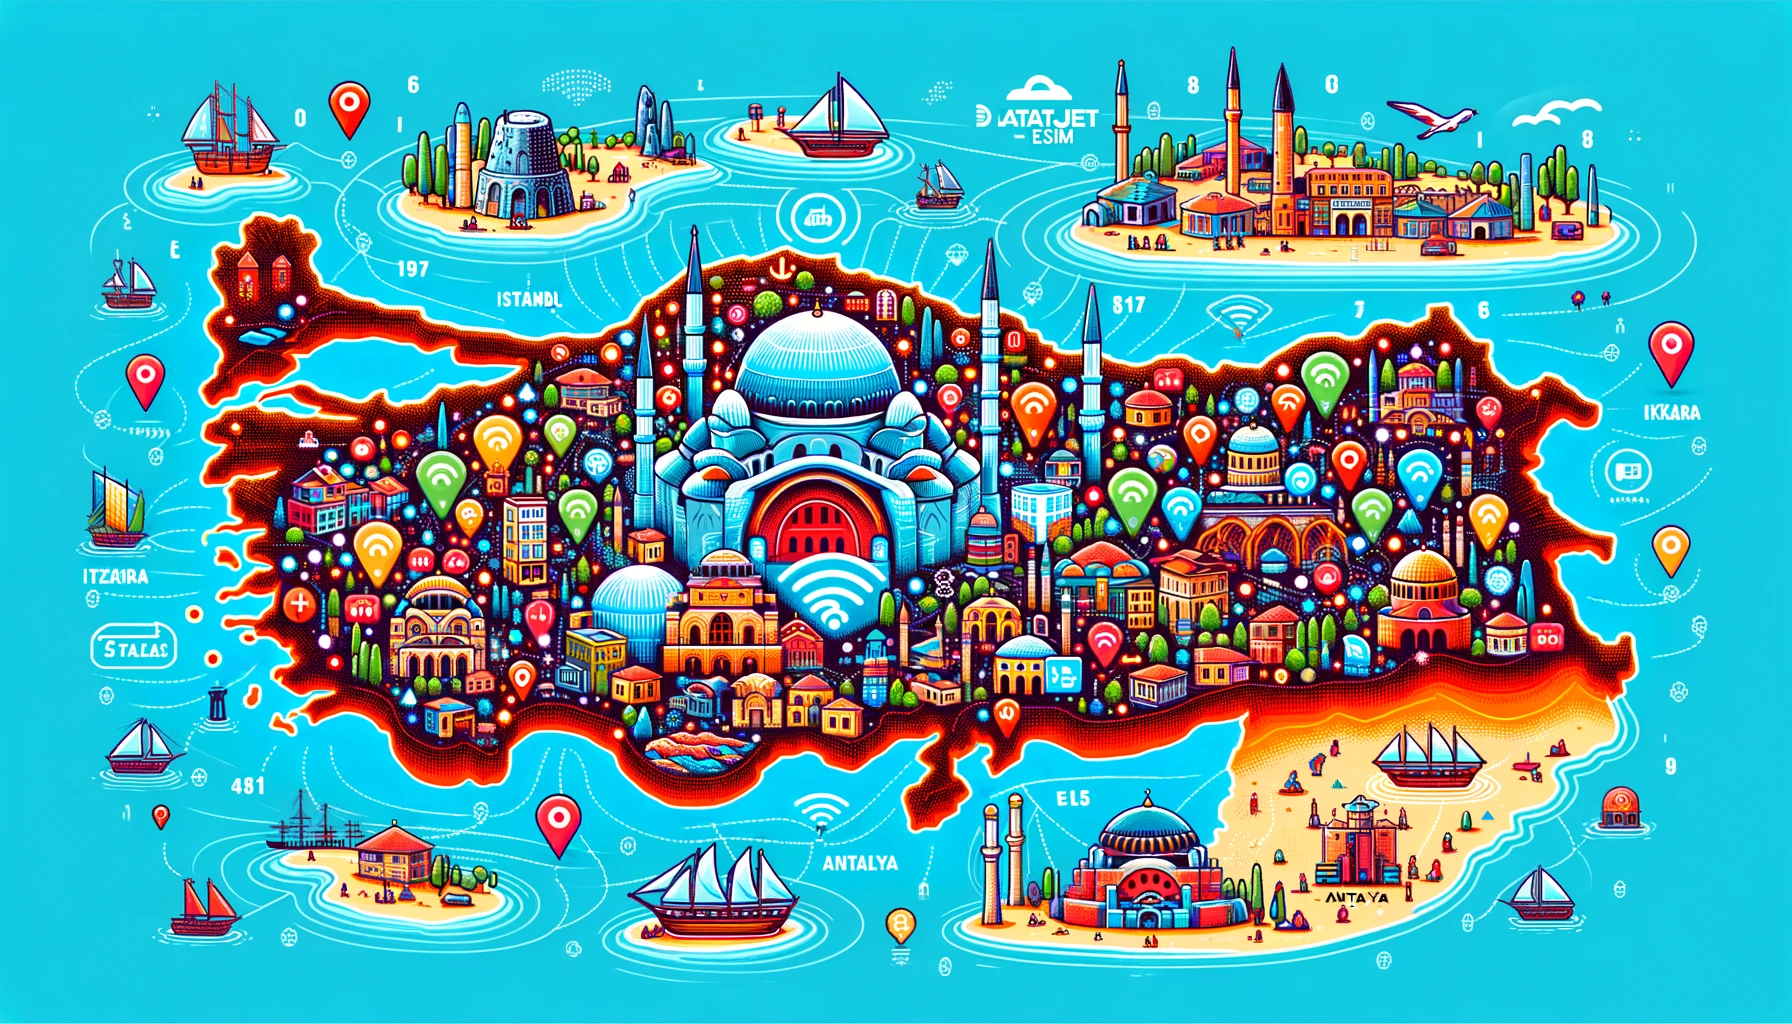 Esim in Turkey: Your Ultimate Guide to Seamless Travel Connectivity with Datajet Esim